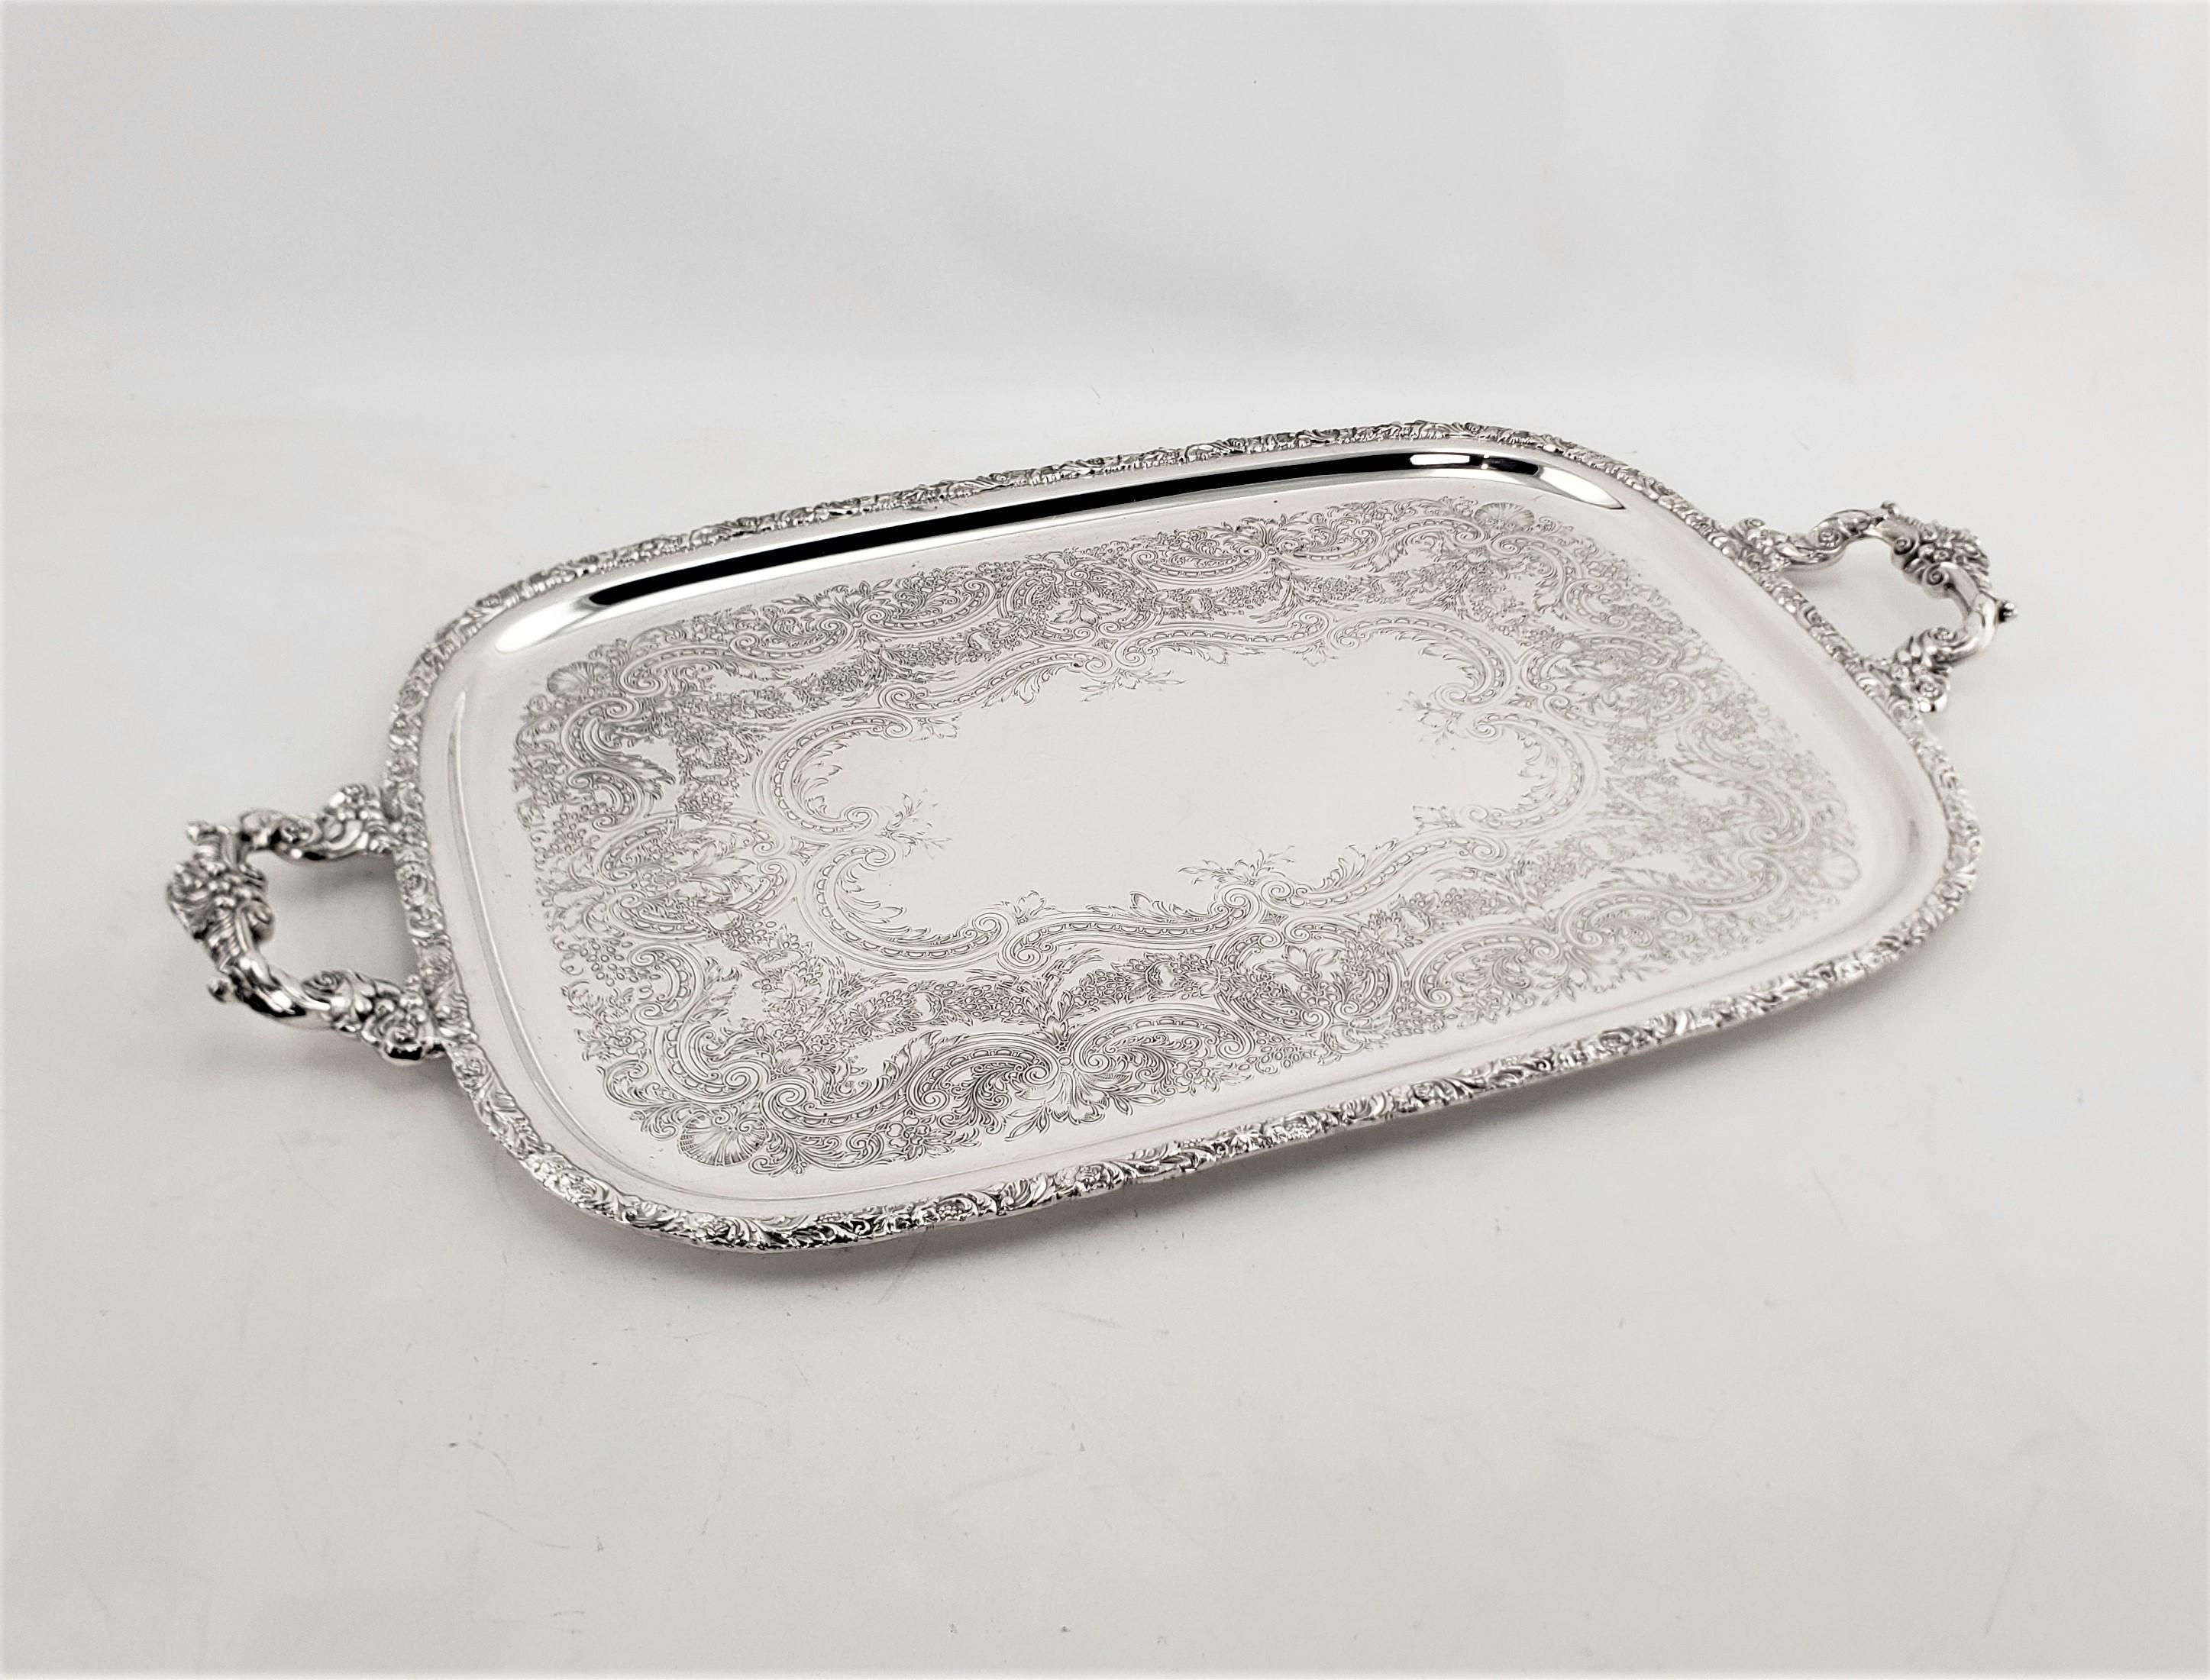 Victorian Large Antique English Silver Plated Serving Tray with Ornate Handles & Engraving